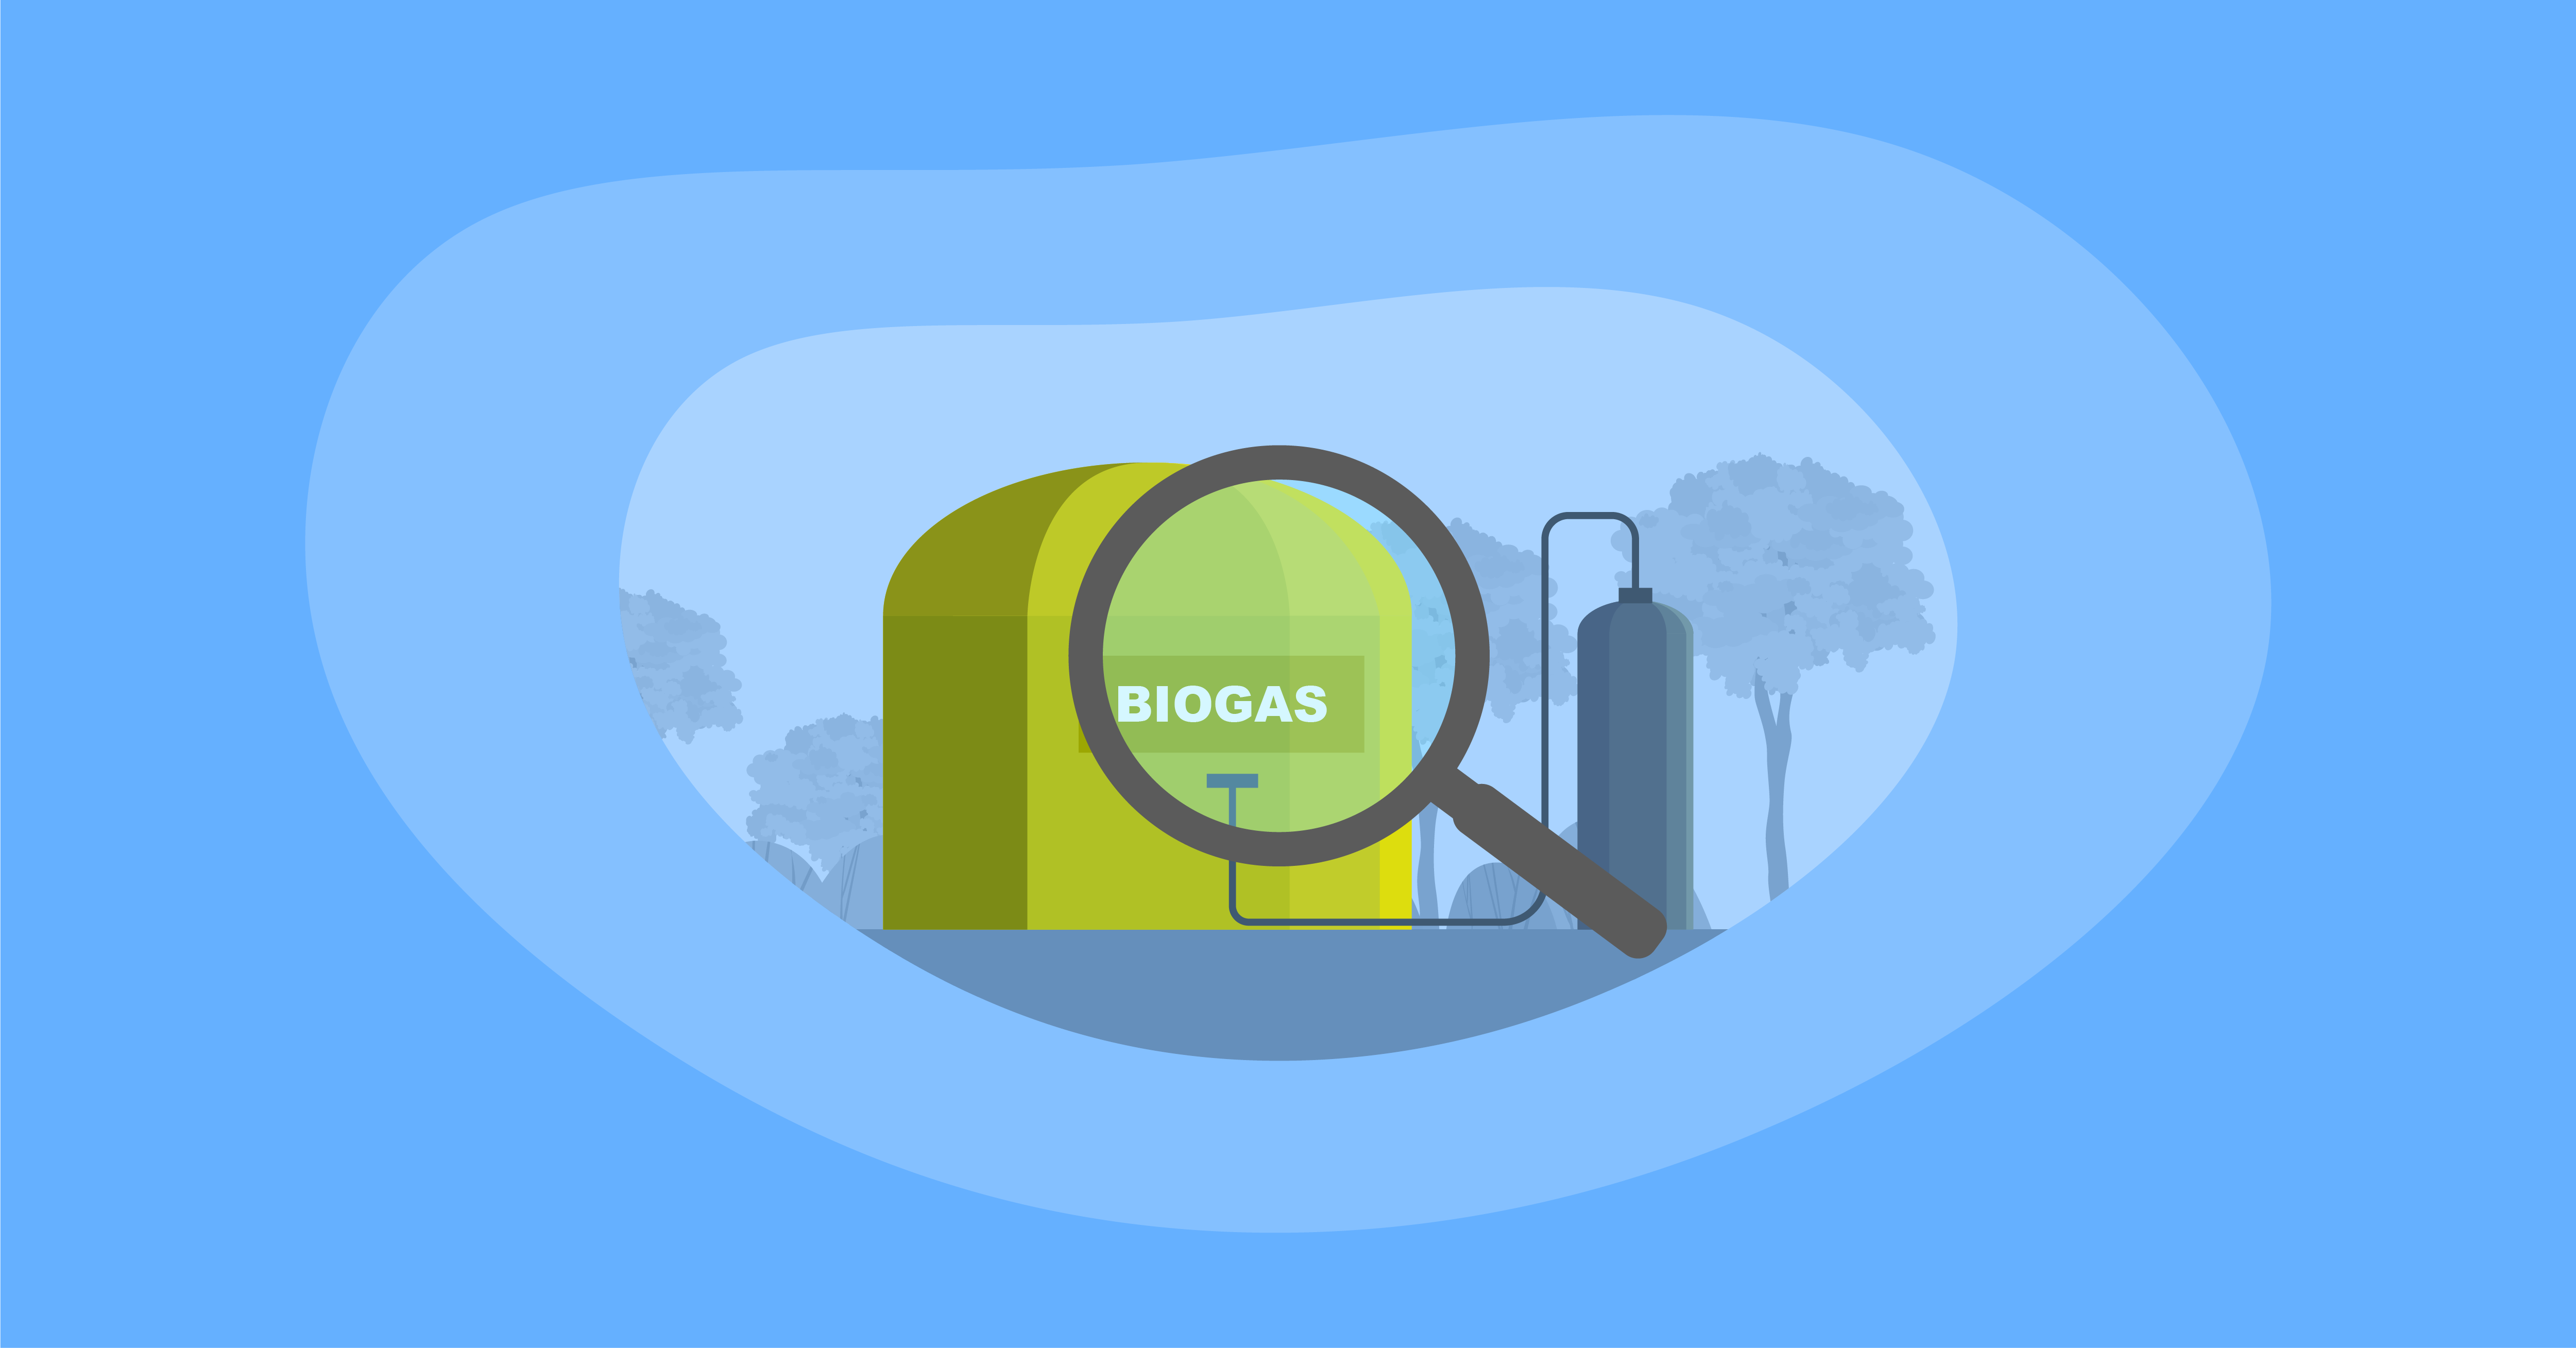 Illustration of a biogas power plant